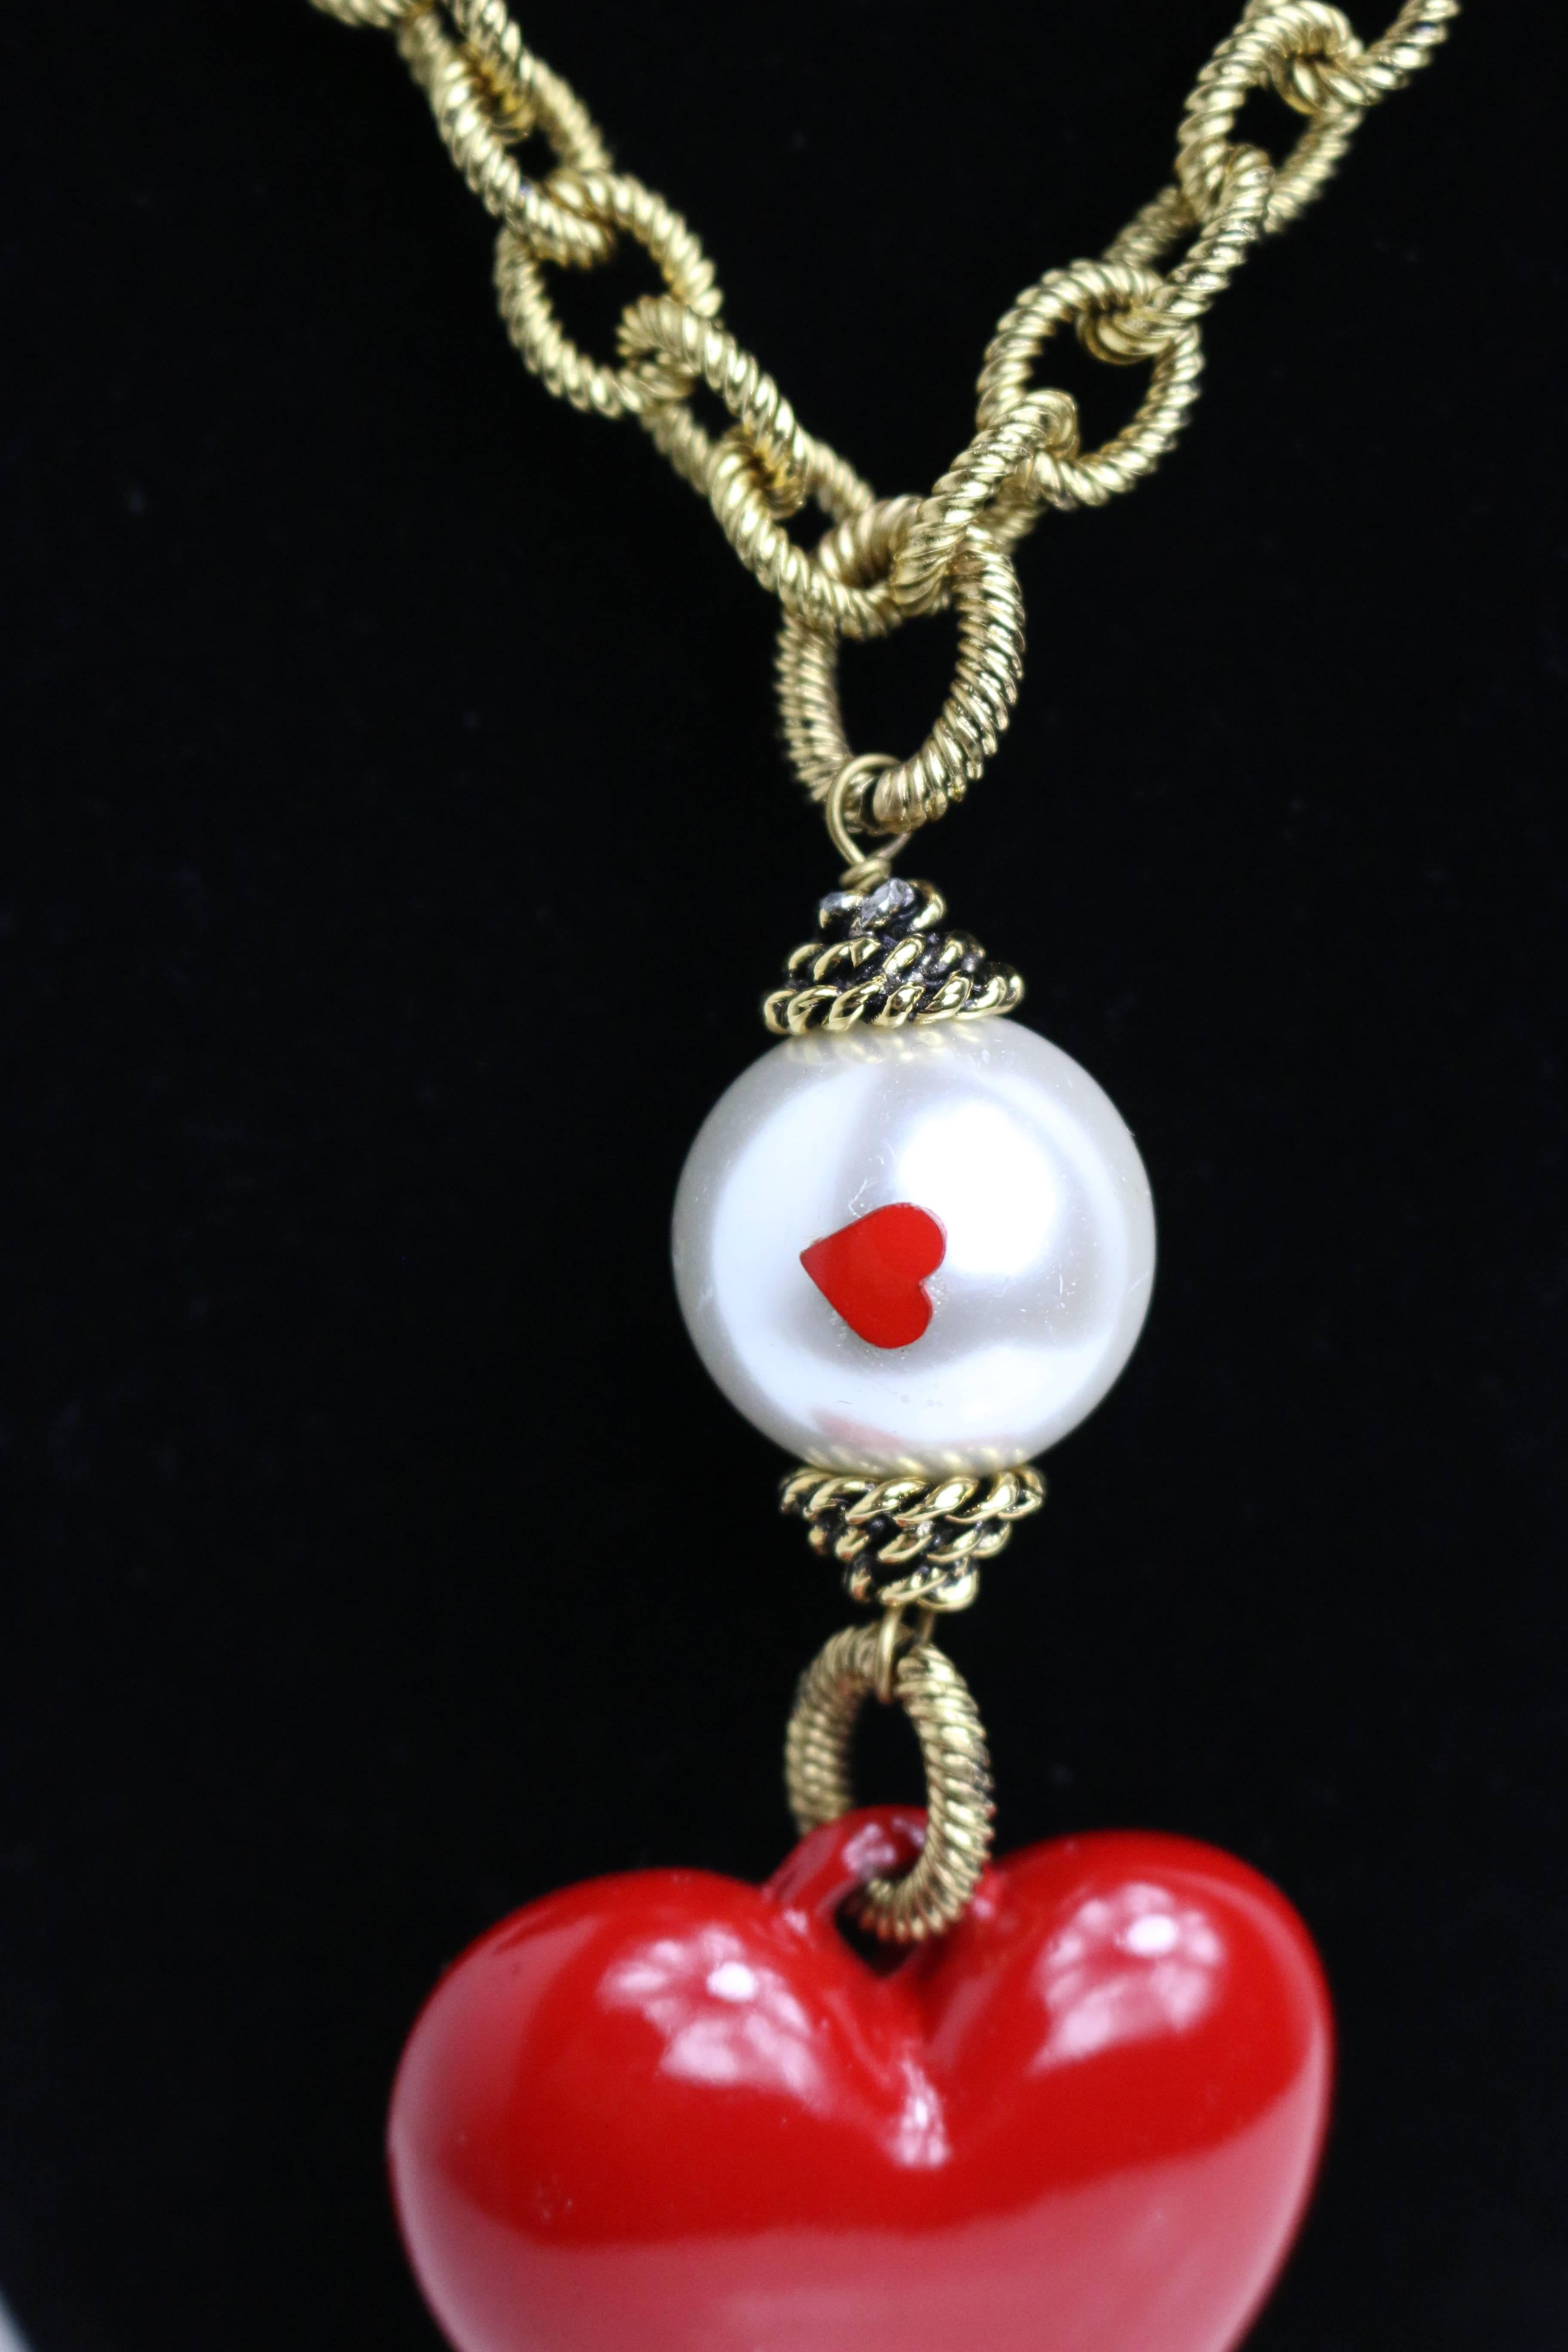 - Vintage 90s rare Moschino faux pearls with heart shape pendant gold metal cable chain necklace. 

- Featuring five faux pearls with two hearts on each, a plastic heart shape pendant and clasp fastening. 

- Made in Italy. 

- The Whole